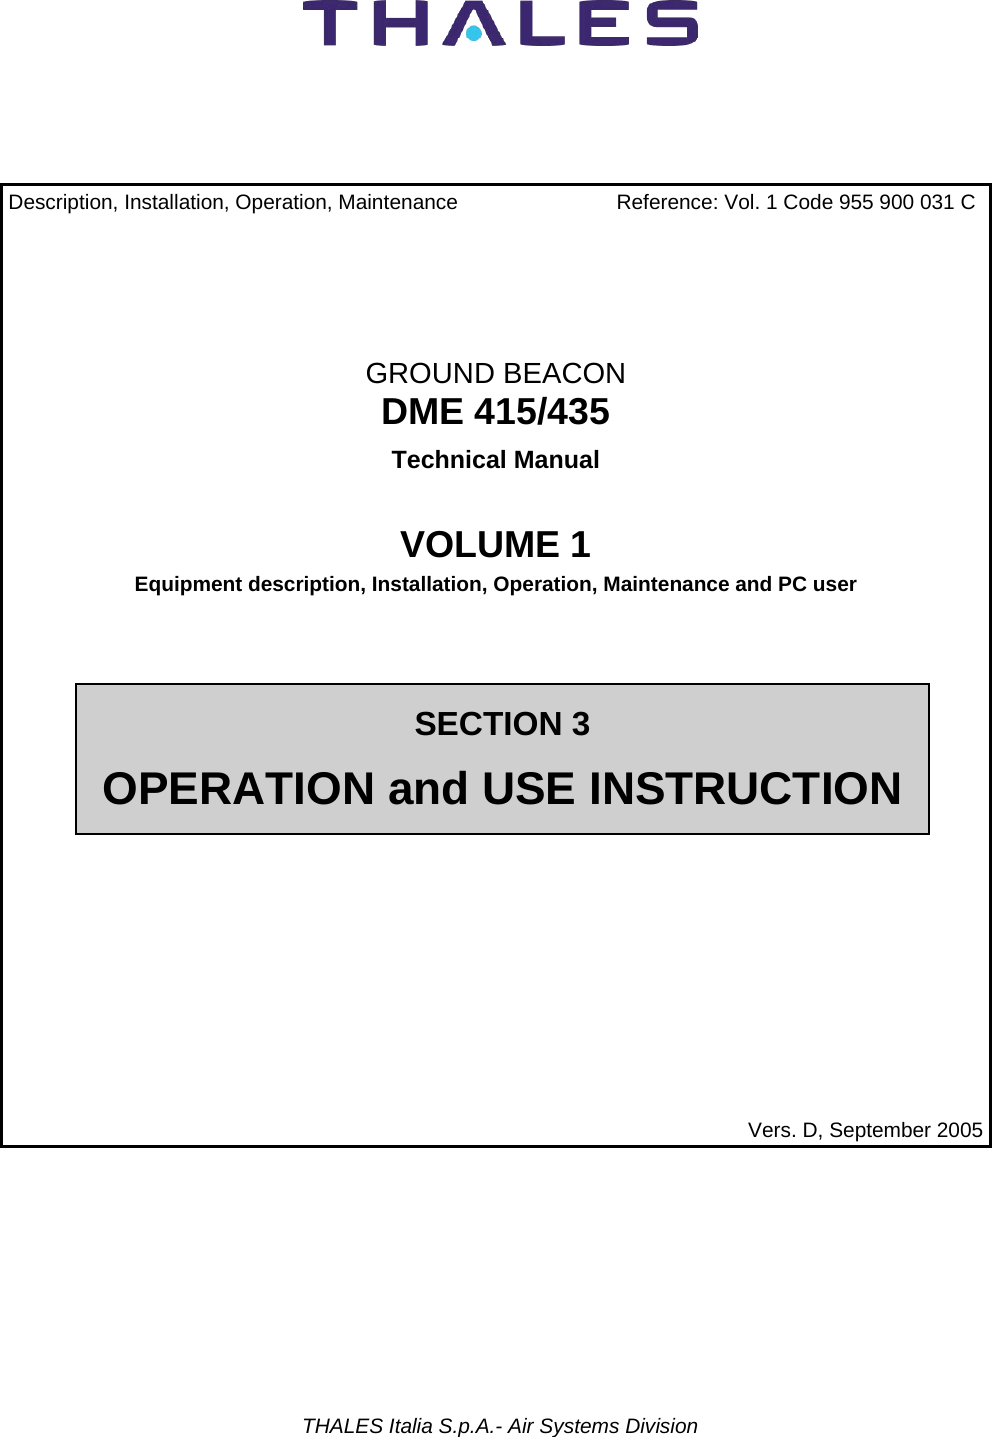            THALES Italia S.p.A.- Air Systems Division     Description, Installation, Operation, Maintenance  Reference: Vol. 1 Code 955 900 031 C    GROUND BEACON DME 415/435 Technical Manual  VOLUME 1 Equipment description, Installation, Operation, Maintenance and PC user      Vers. D, September 2005 SECTION 3 OPERATION and USE INSTRUCTION 